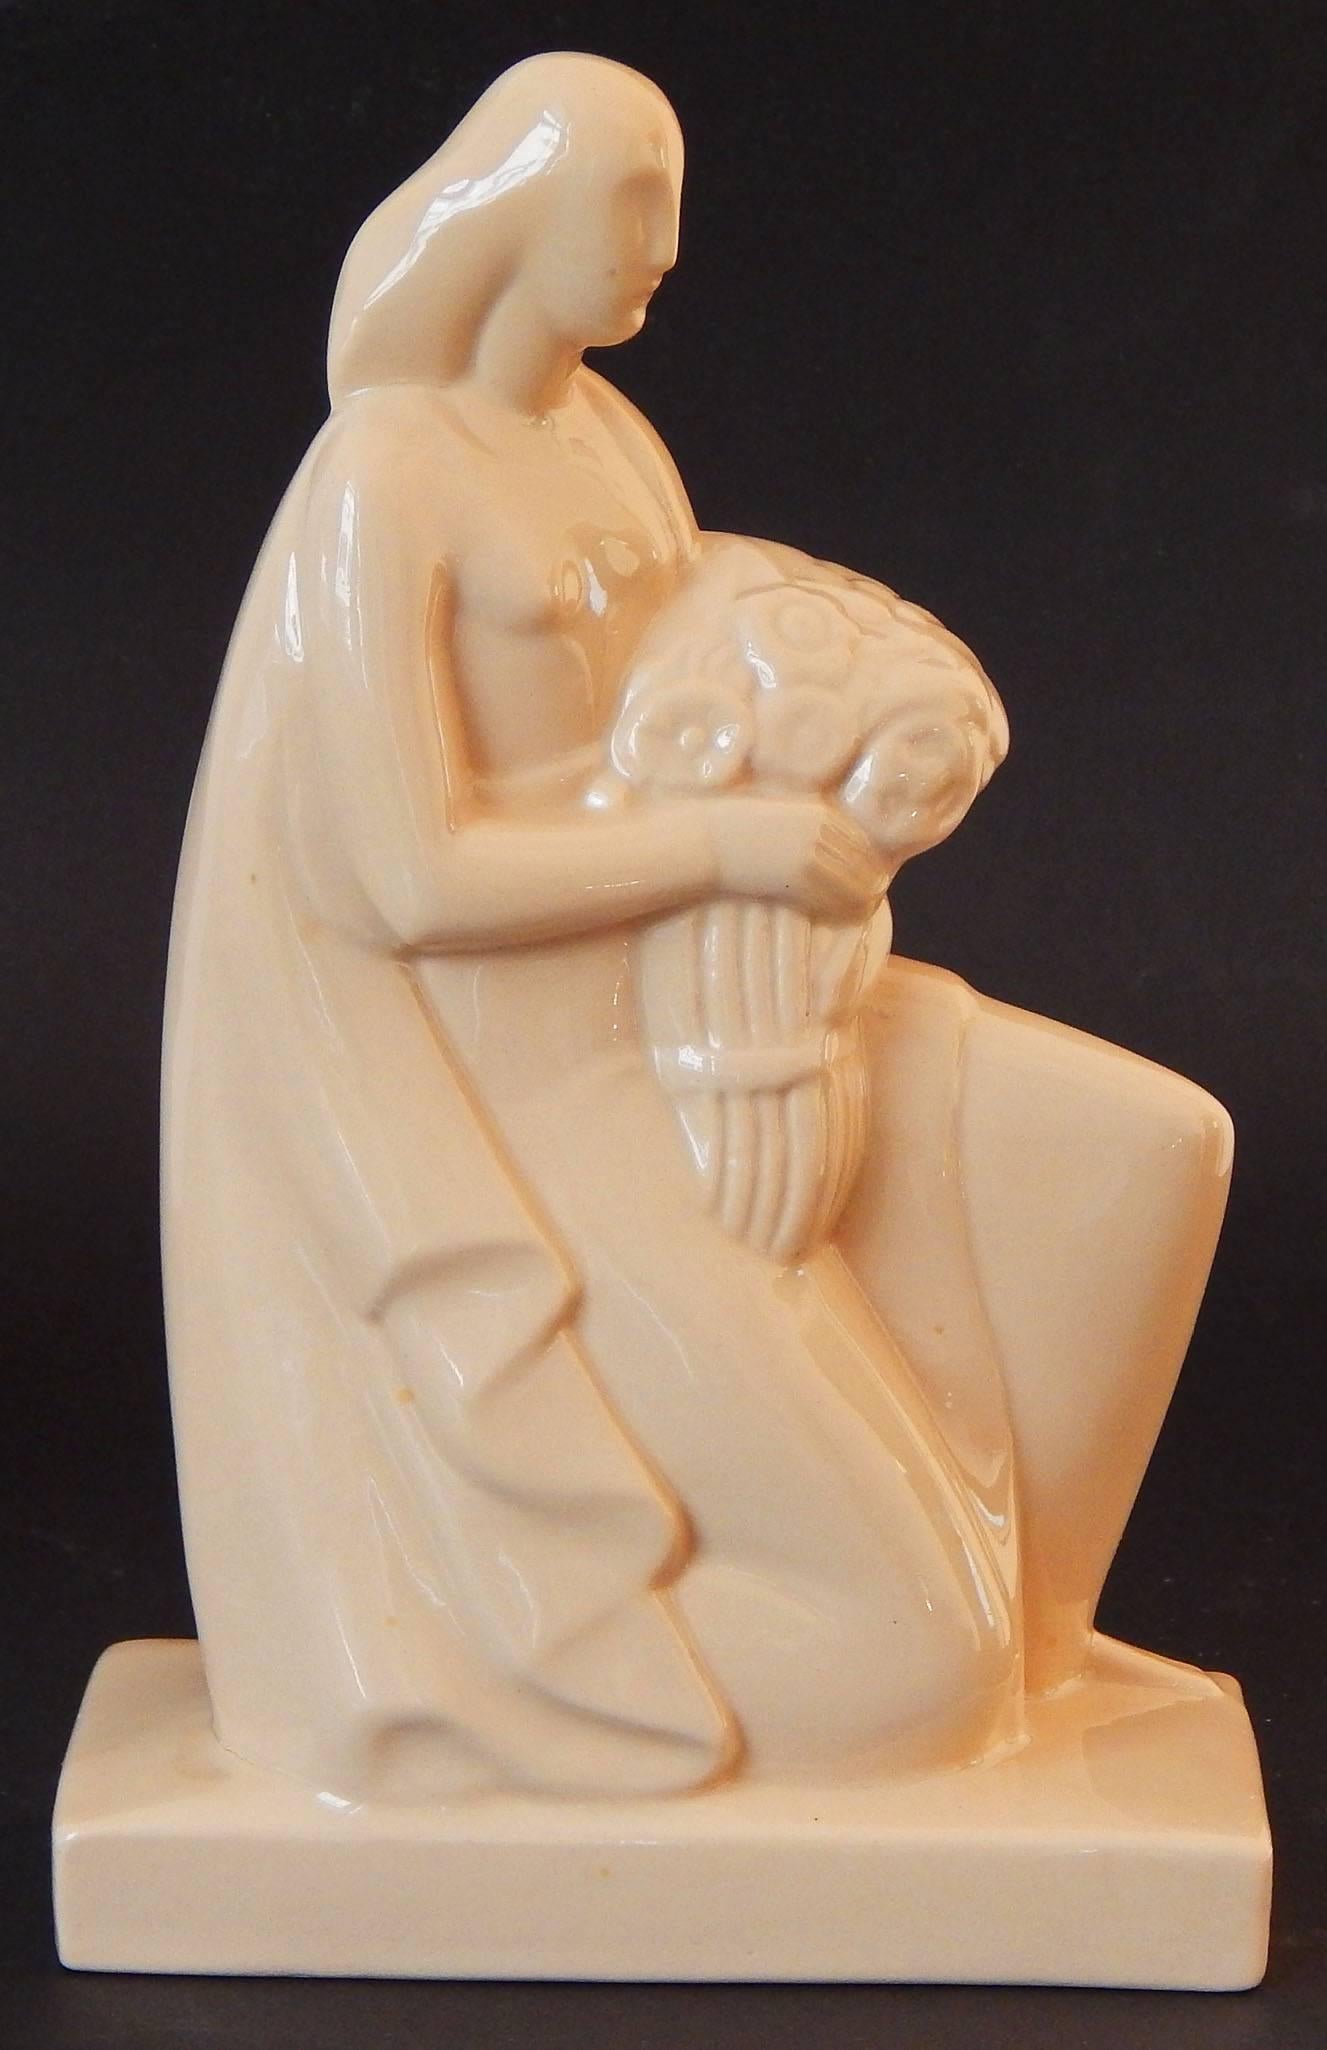 Bathed in a lovely shade of pale caramel, this rare pair of stylized Art Deco sculptures depict female figures holding a scroll in one case, and a bouquet of flowers in the other. The sculptor was Geza De Vegh, an important artist and ceramicist who